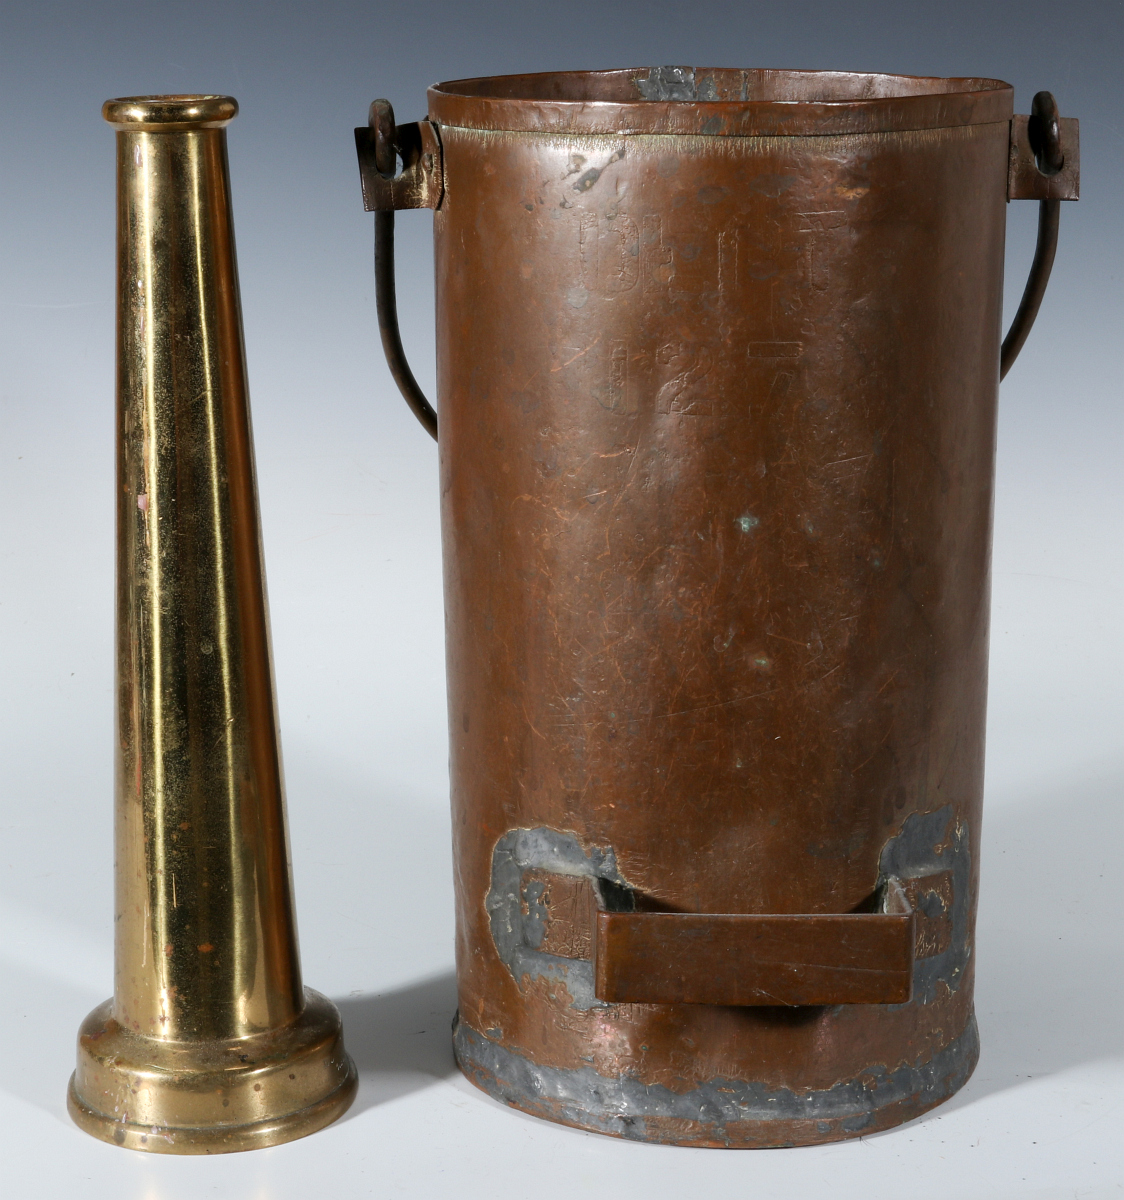 ANTIQUE BRASS NOZZLE AND COPPER BUCKET